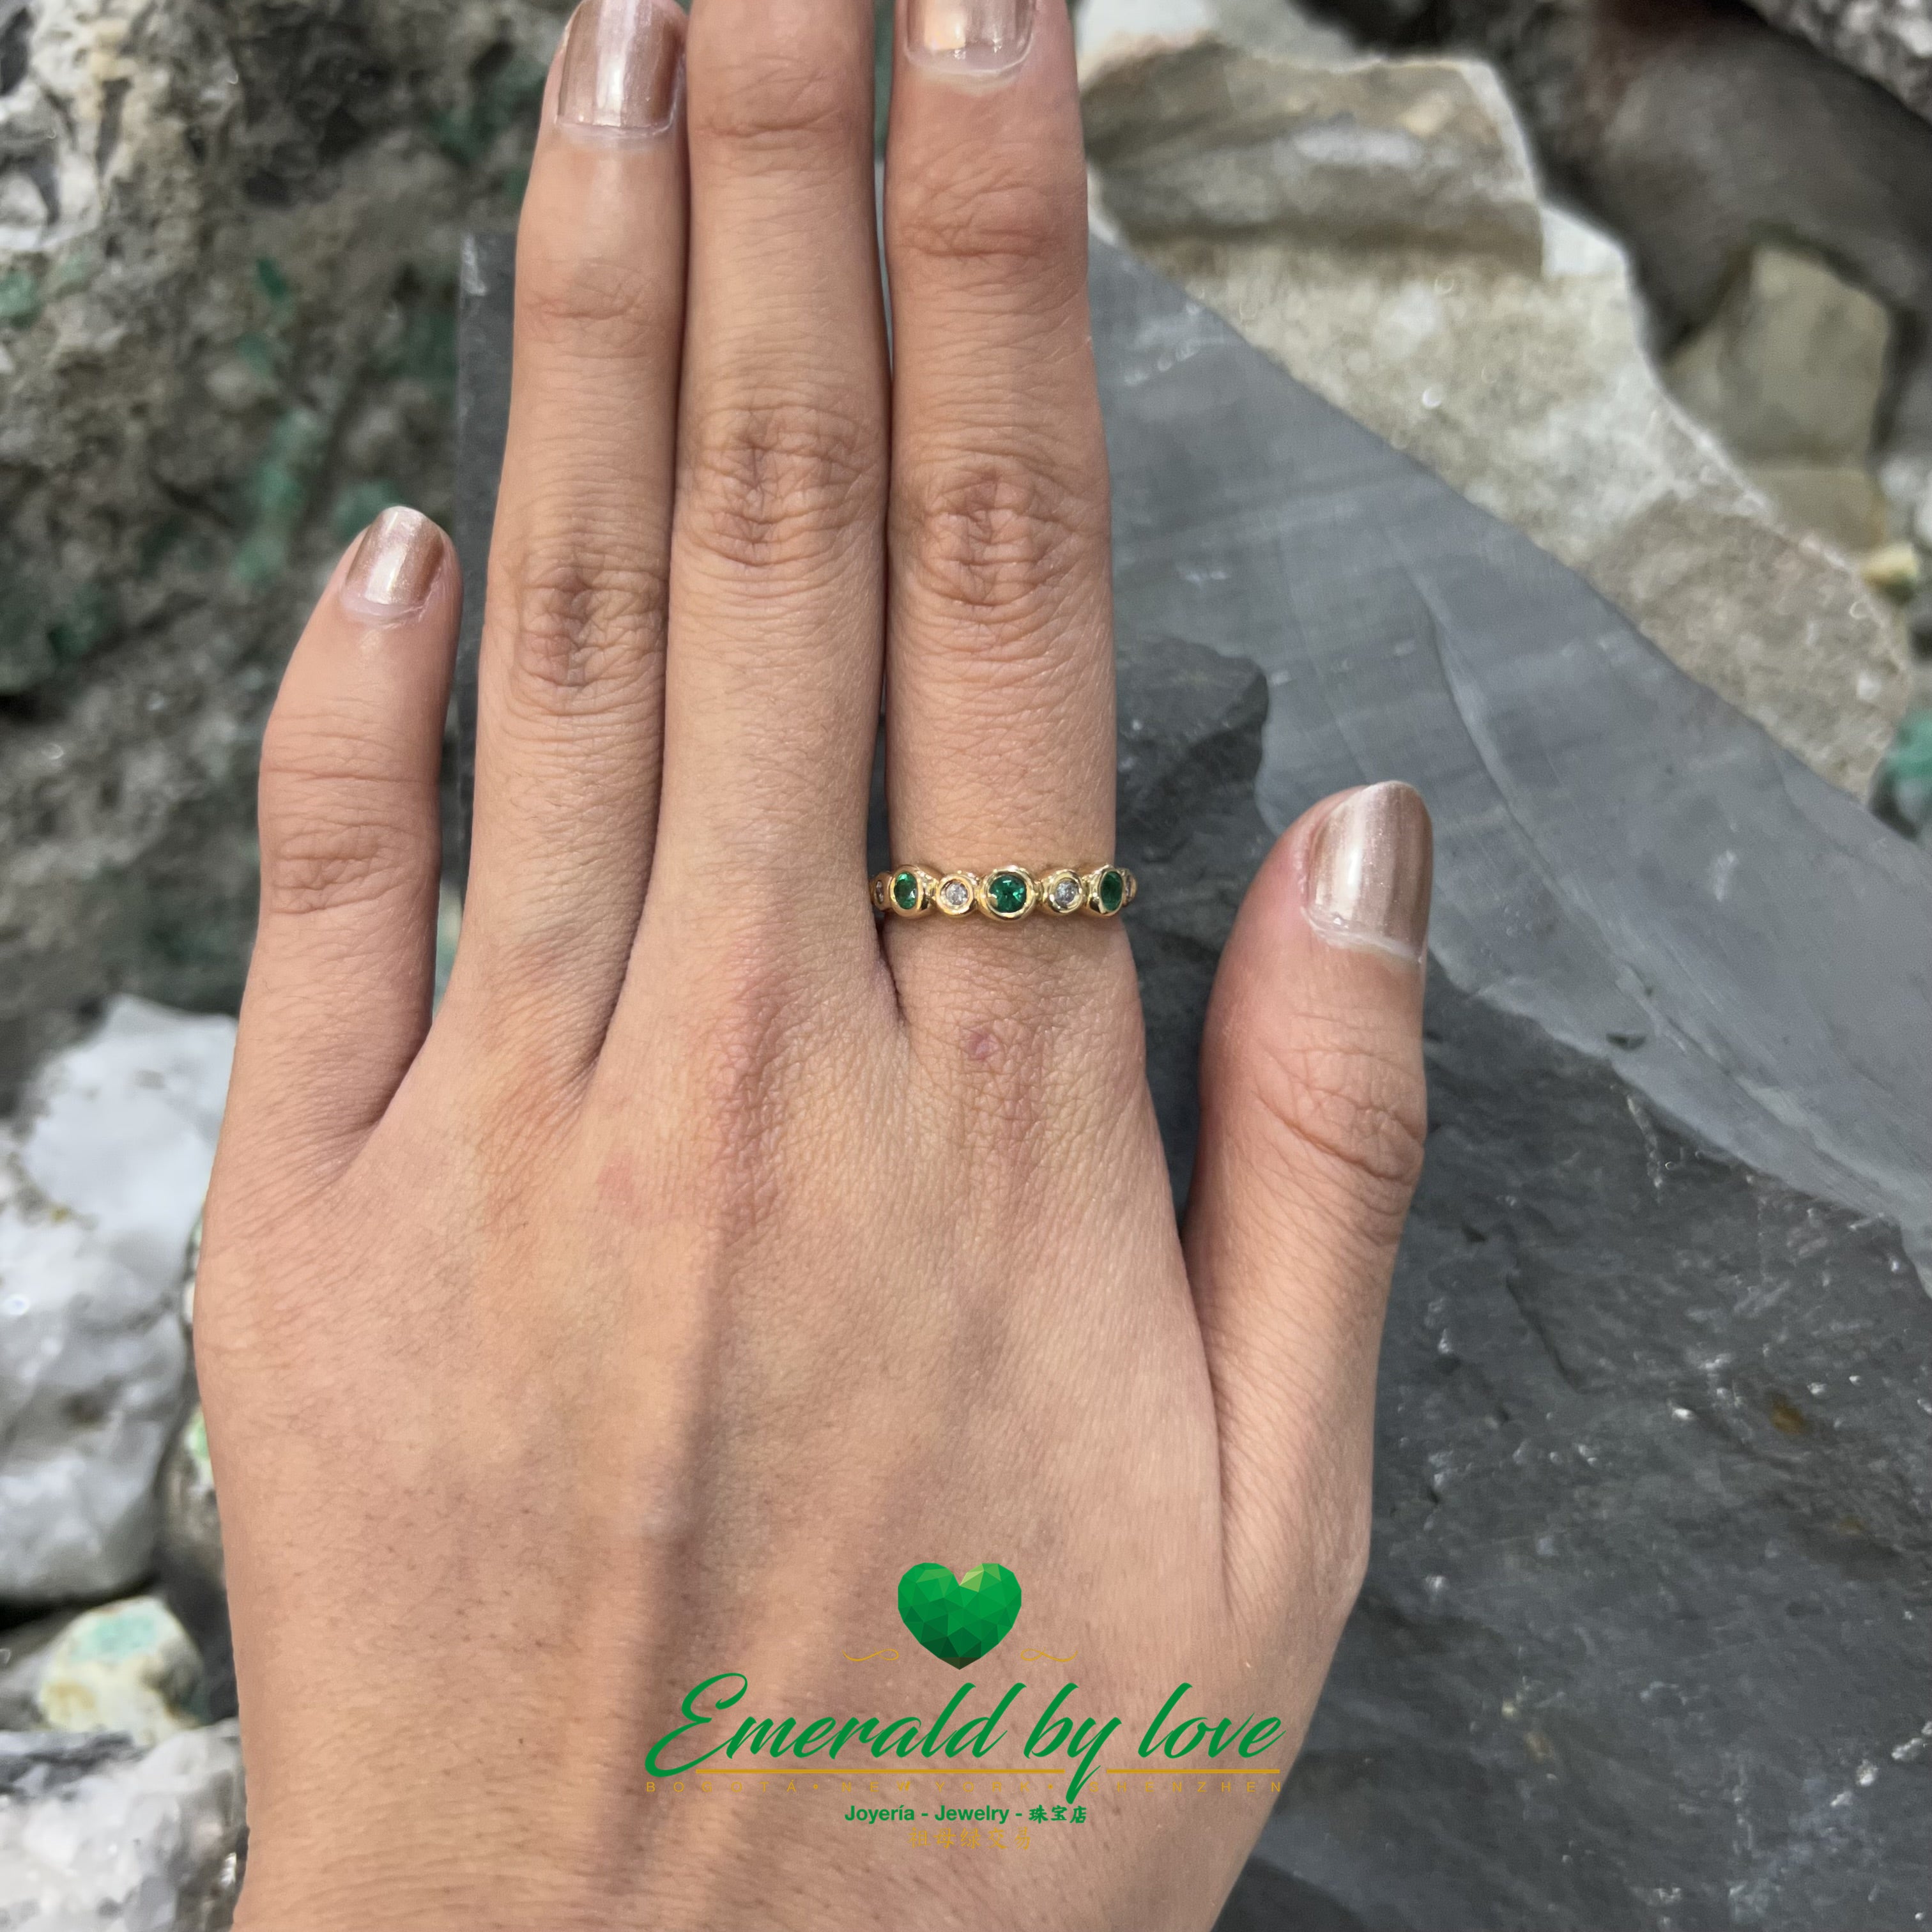 Colombian Emerald band Ring in 18k Yellow Gold